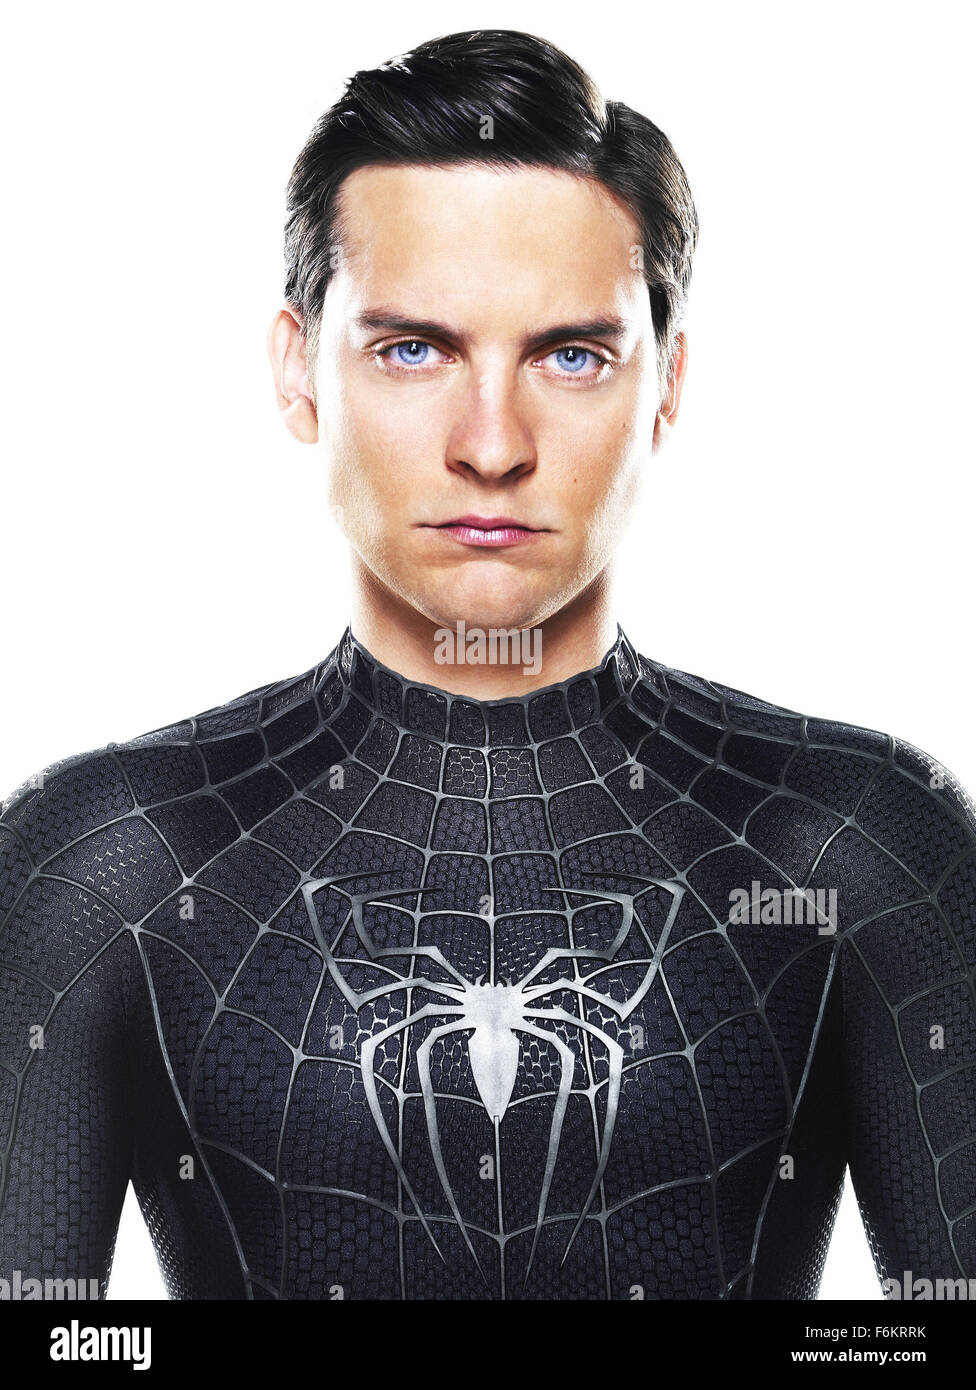 May 01, 2007 - New York, NY, USA - RELEASE DATE: May 4, 2007. DIRECTOR: Sam Raimi. STUDIO: Columbia Pictures. PLOT: A strange black entity from another world bonds with Peter Parker and causes inner turmoil as he contends with new villains, temptations, and revenge. PICTURED: TOBEY MAGUIRE (Peter Parker/Spider-Man). (Credit Image: c Columbia Pictures) RESTRICTIONS: This is a publicly distributed film, television or publicity photograph. Non-editorial use may require additional clearances. Stock Photo